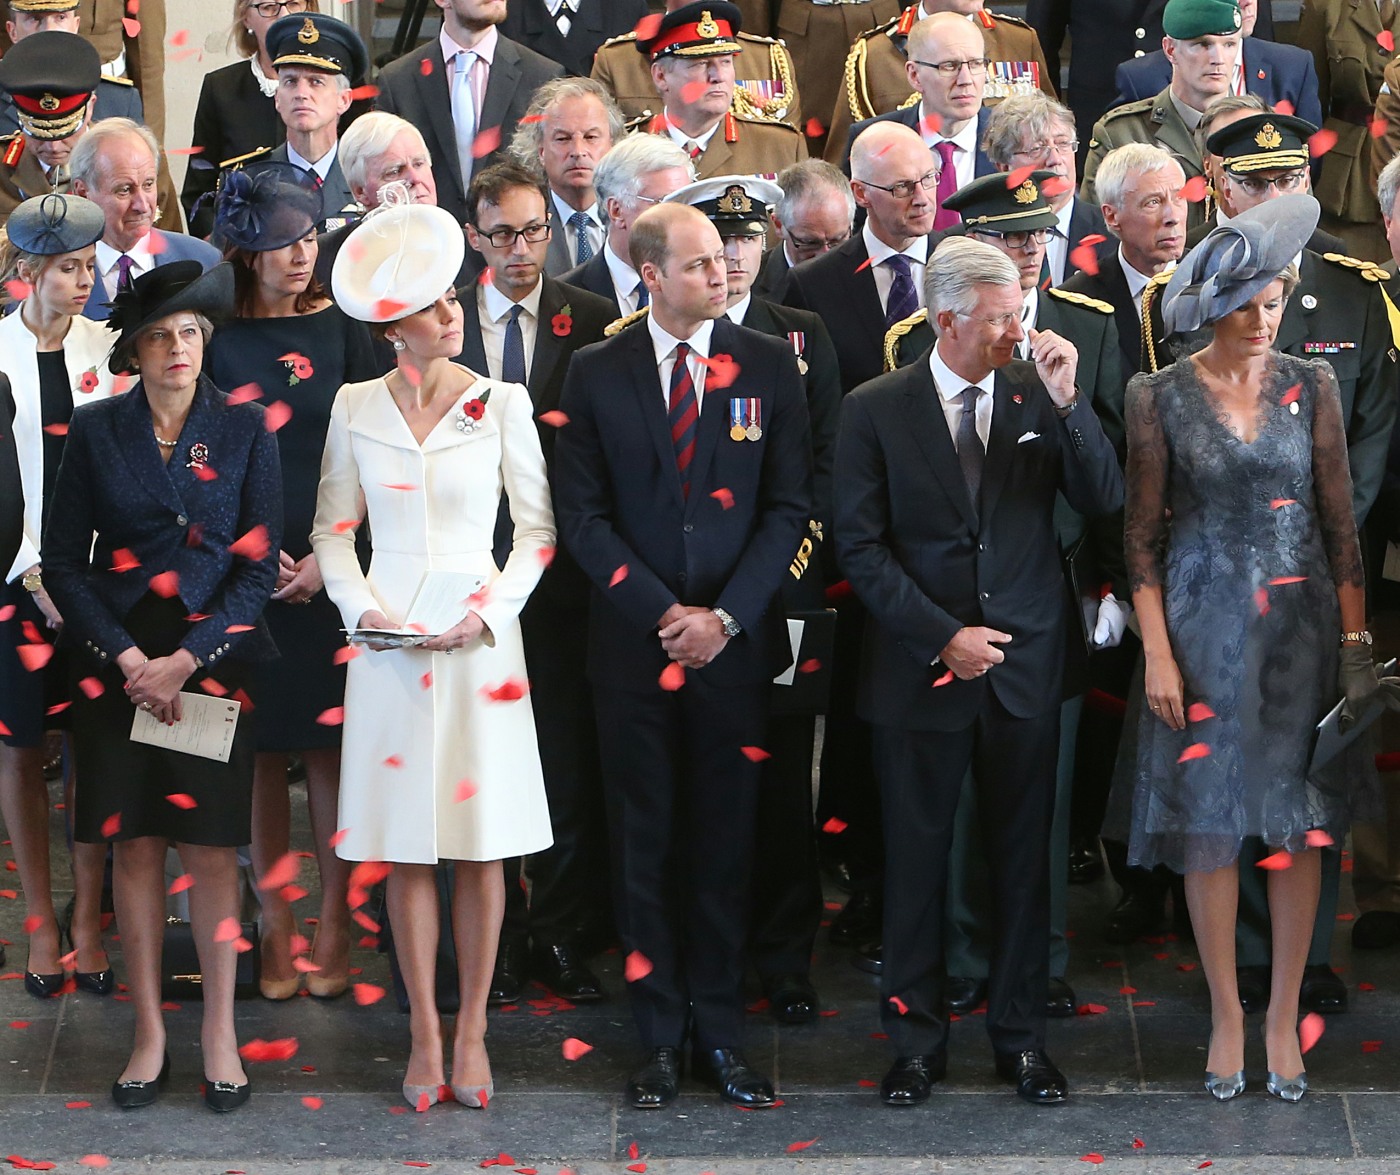 Official commemorations marking the 100th anniversary of the Battle of Passchendaele